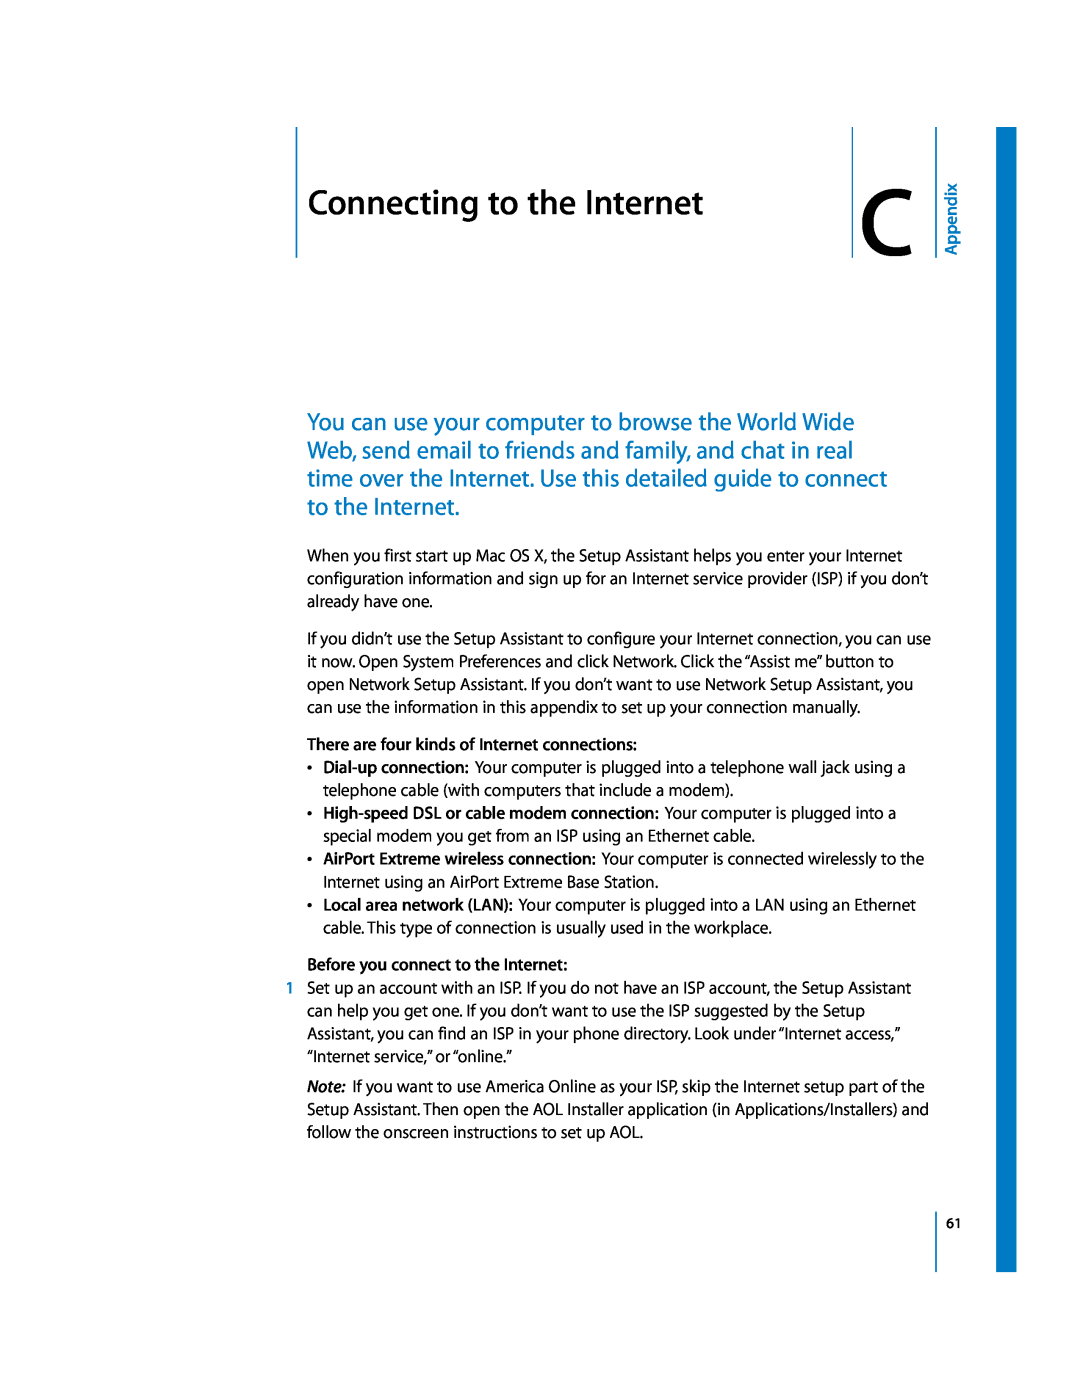 Apple EMac manual Connecting to the Internet, Appendix, There are four kinds of Internet connections 